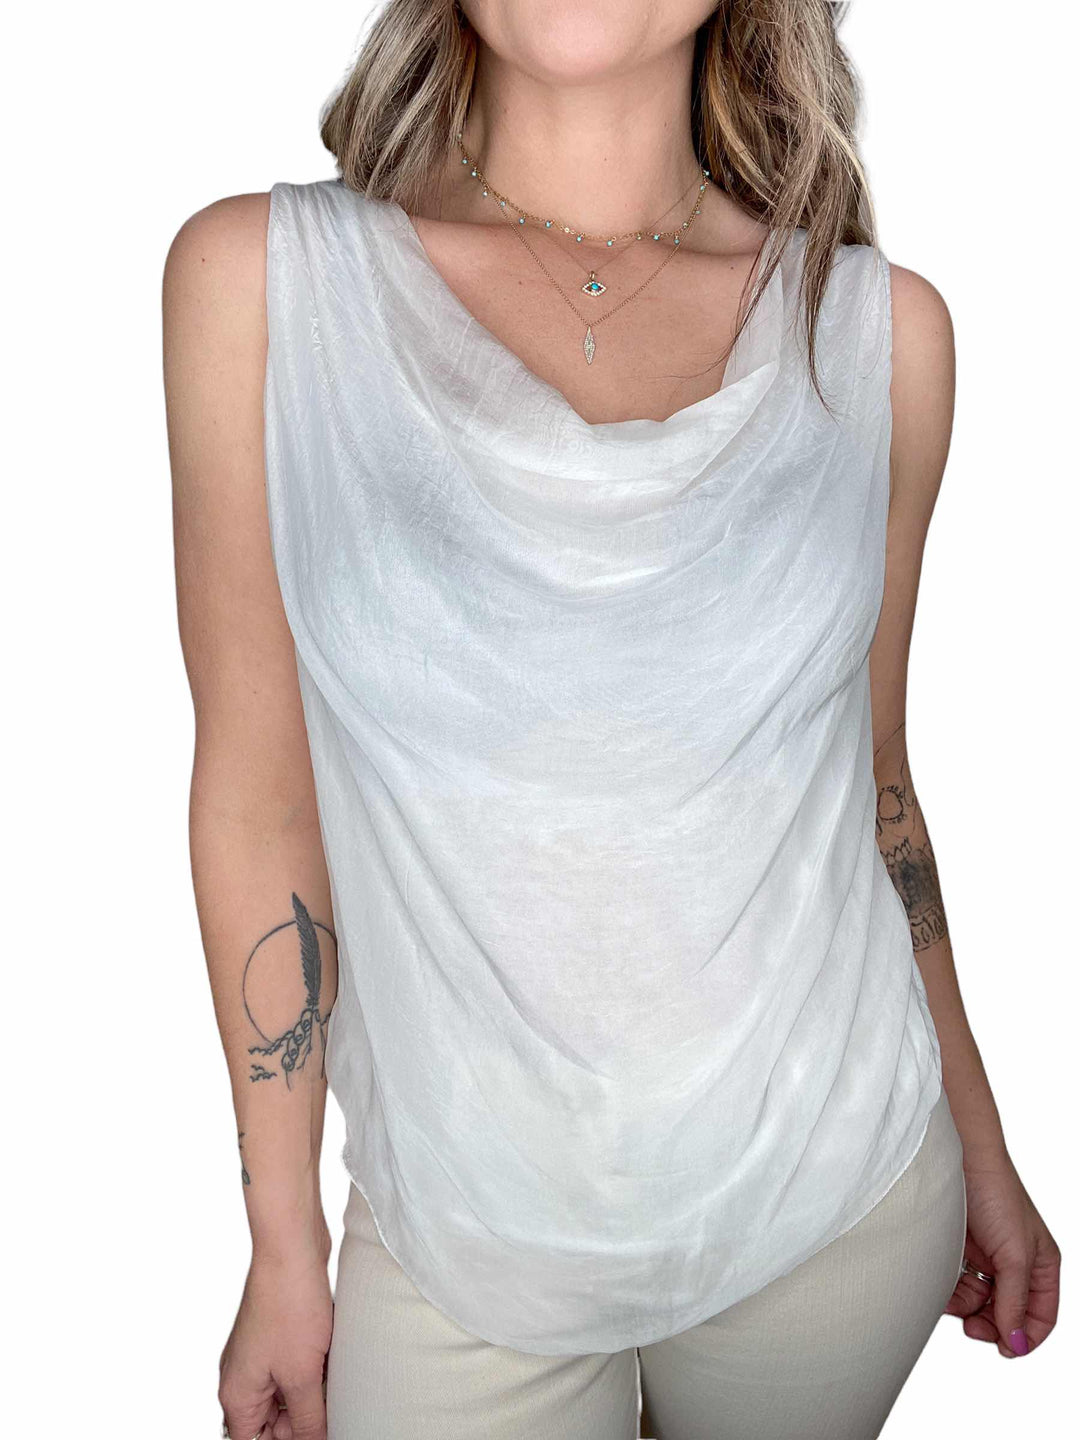 WHITE SILK SLEEVLESS TOP - Kingfisher Road - Online Boutique